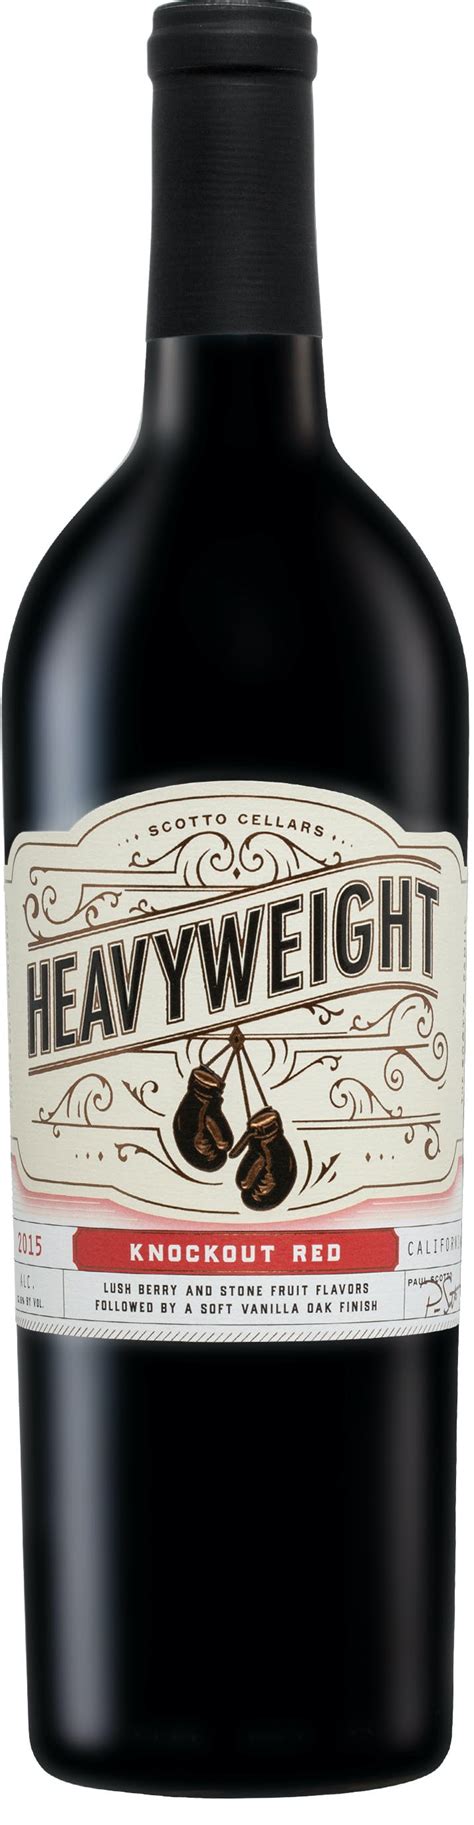 Heavyweight Knockout Red 750ml Petite Cellars